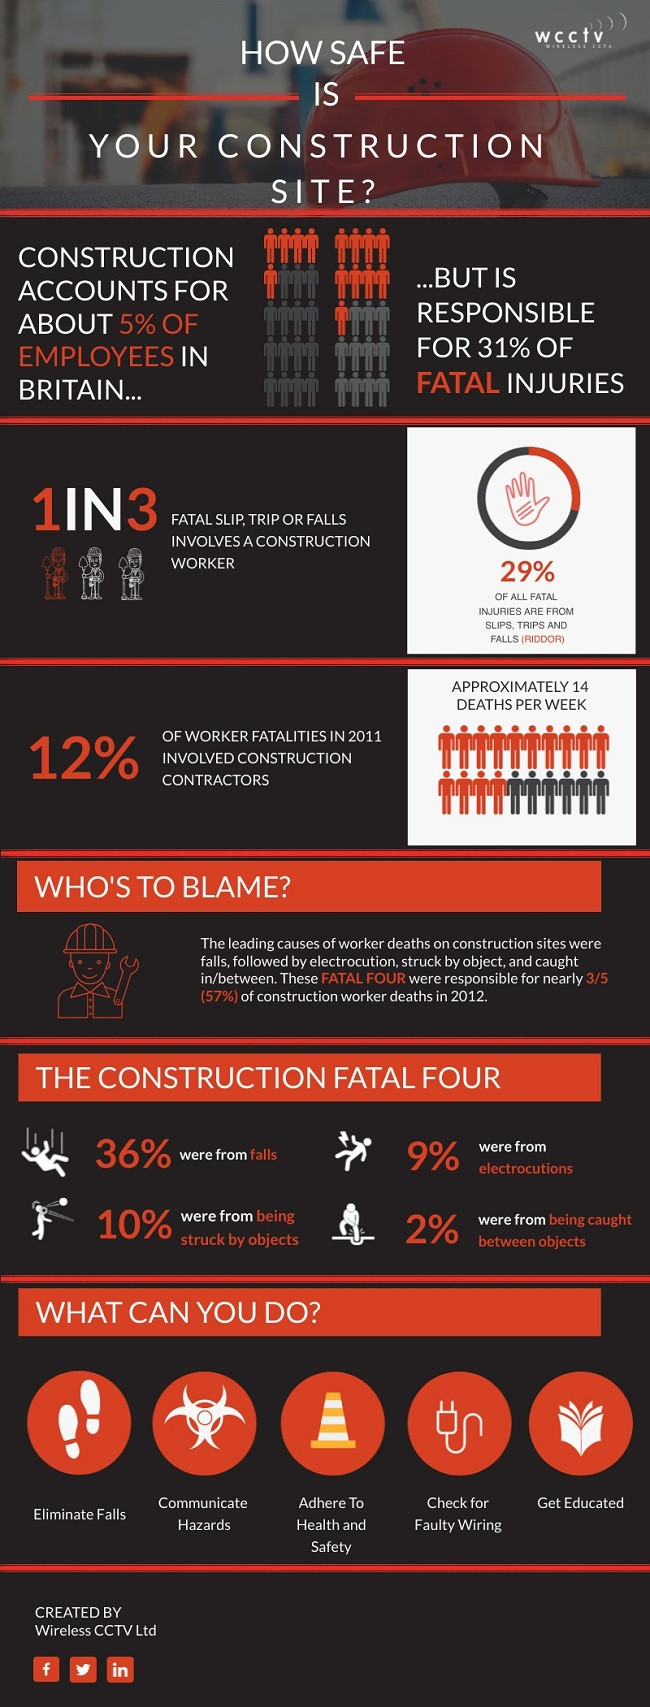 How Safe is Your Construction Site [INFOGRAPHIC] - WCCTV